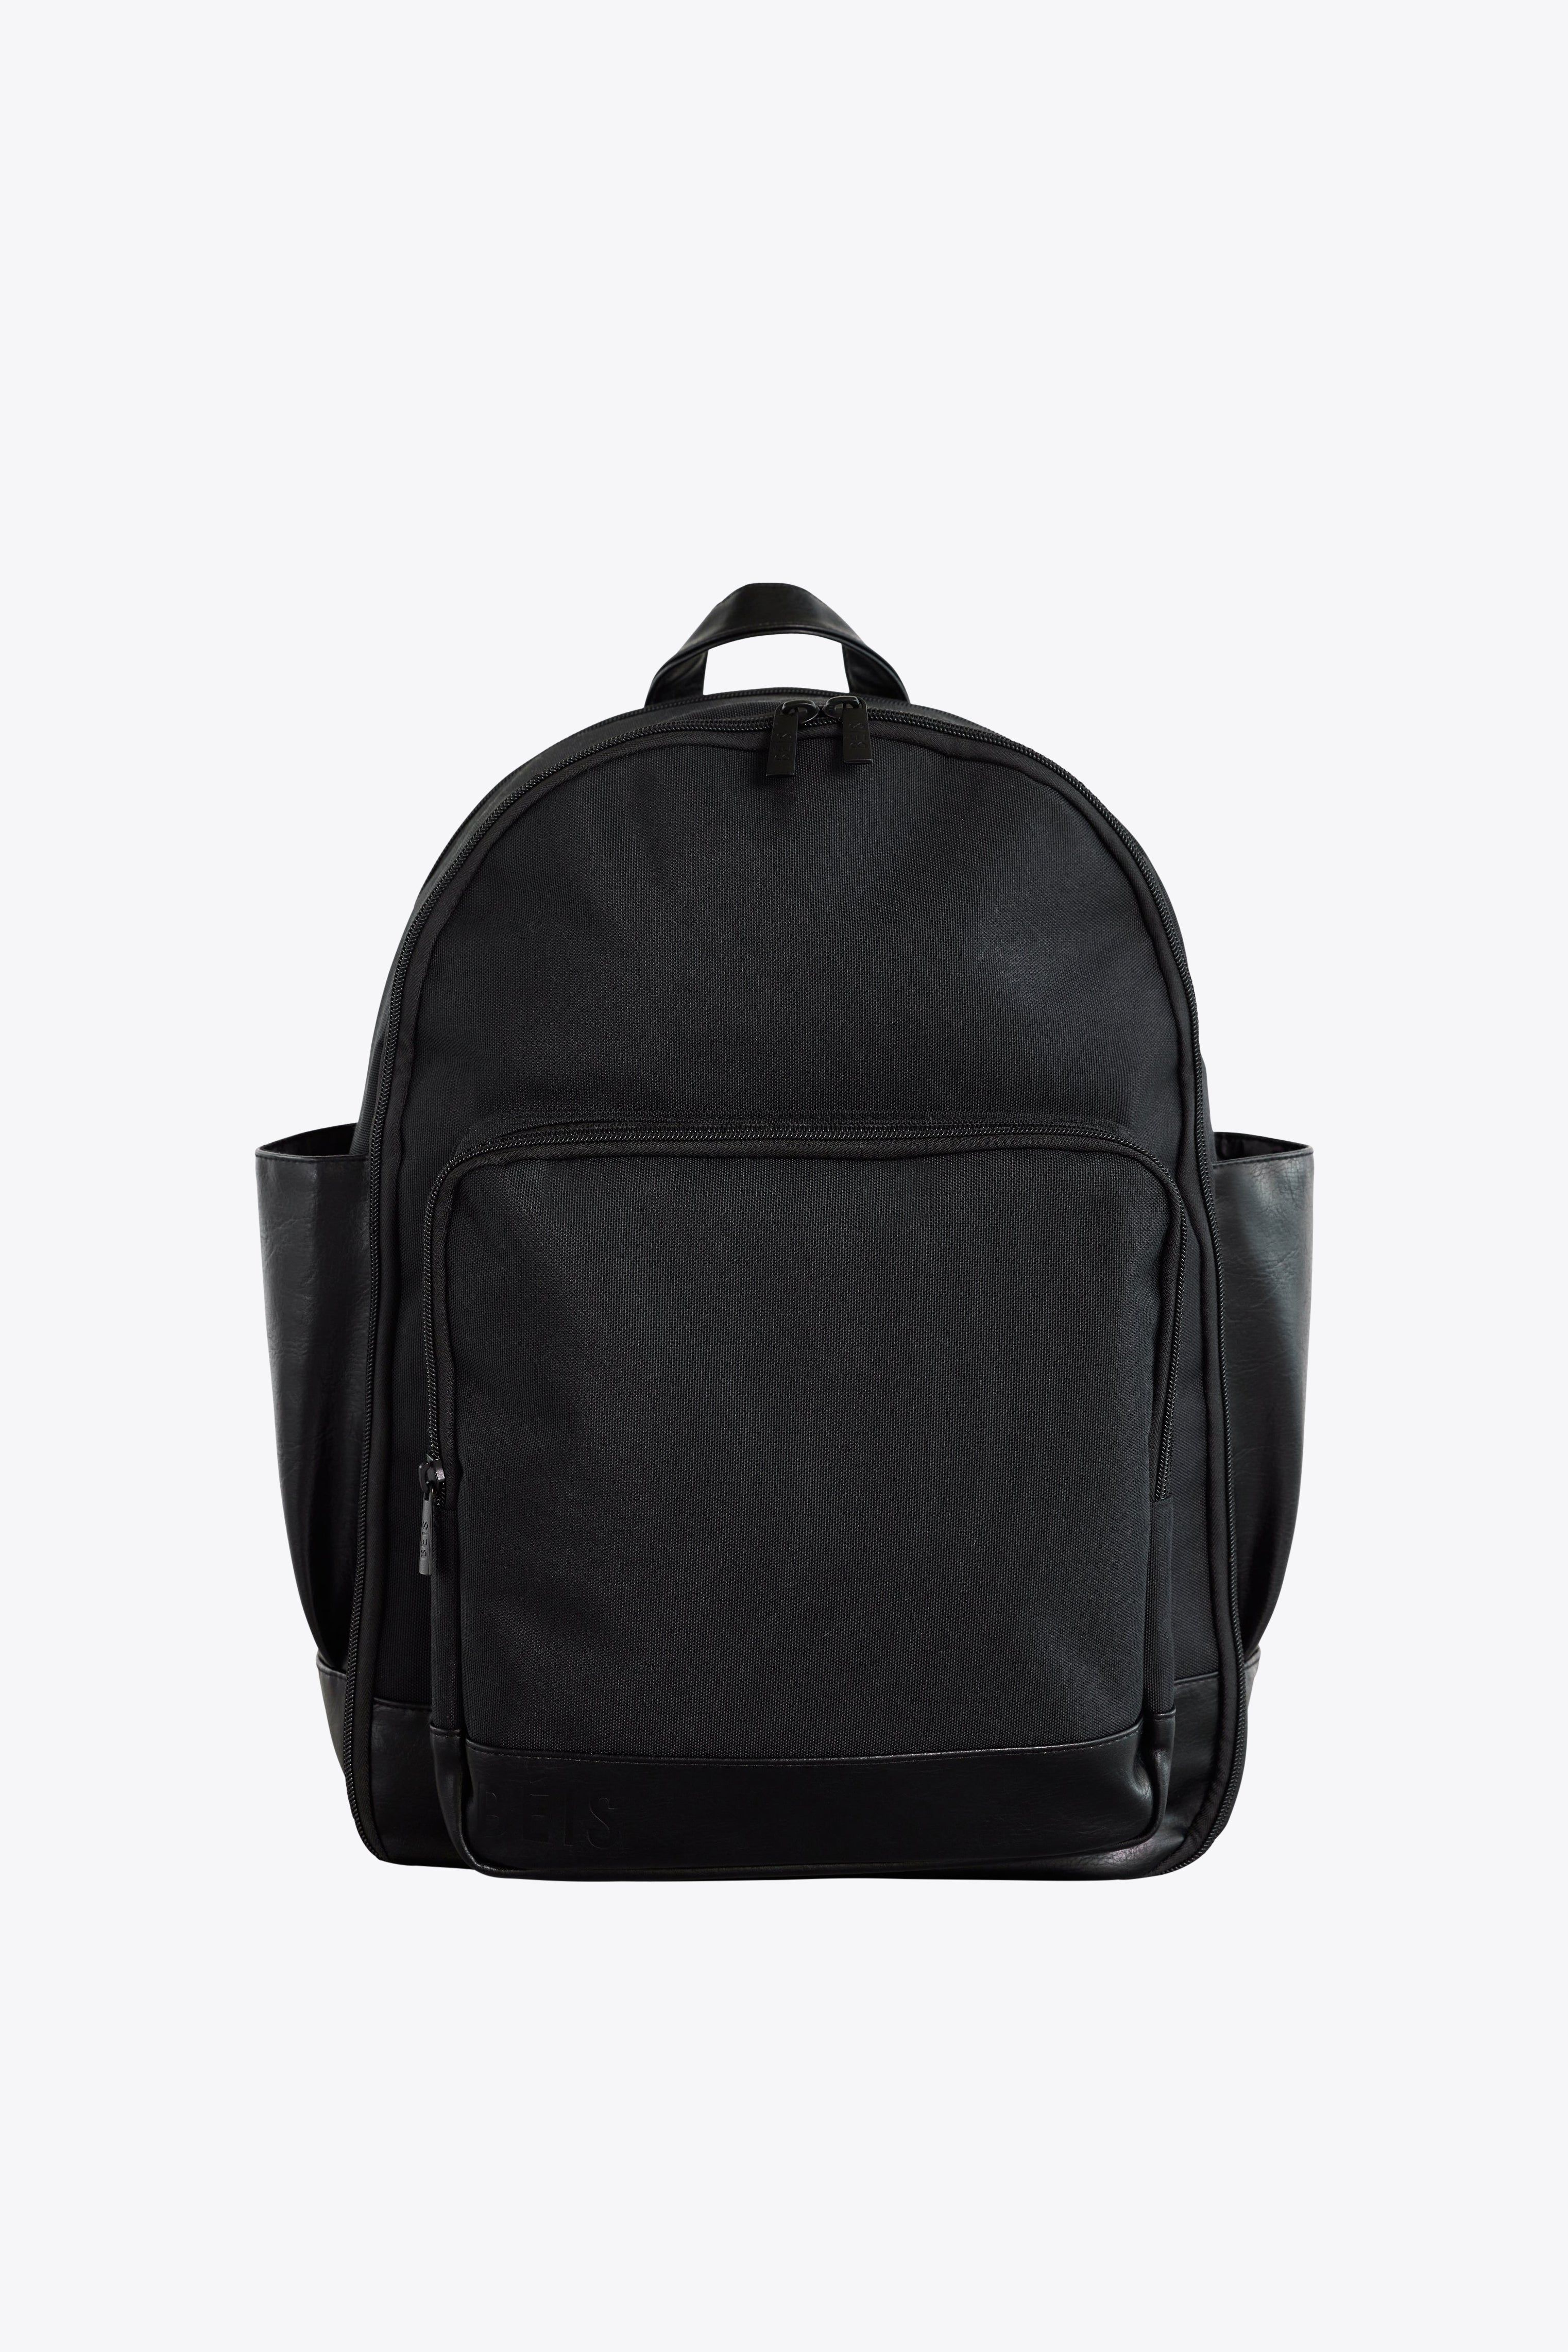 THE BACKPACK IN BLACK | BÉIS Travel